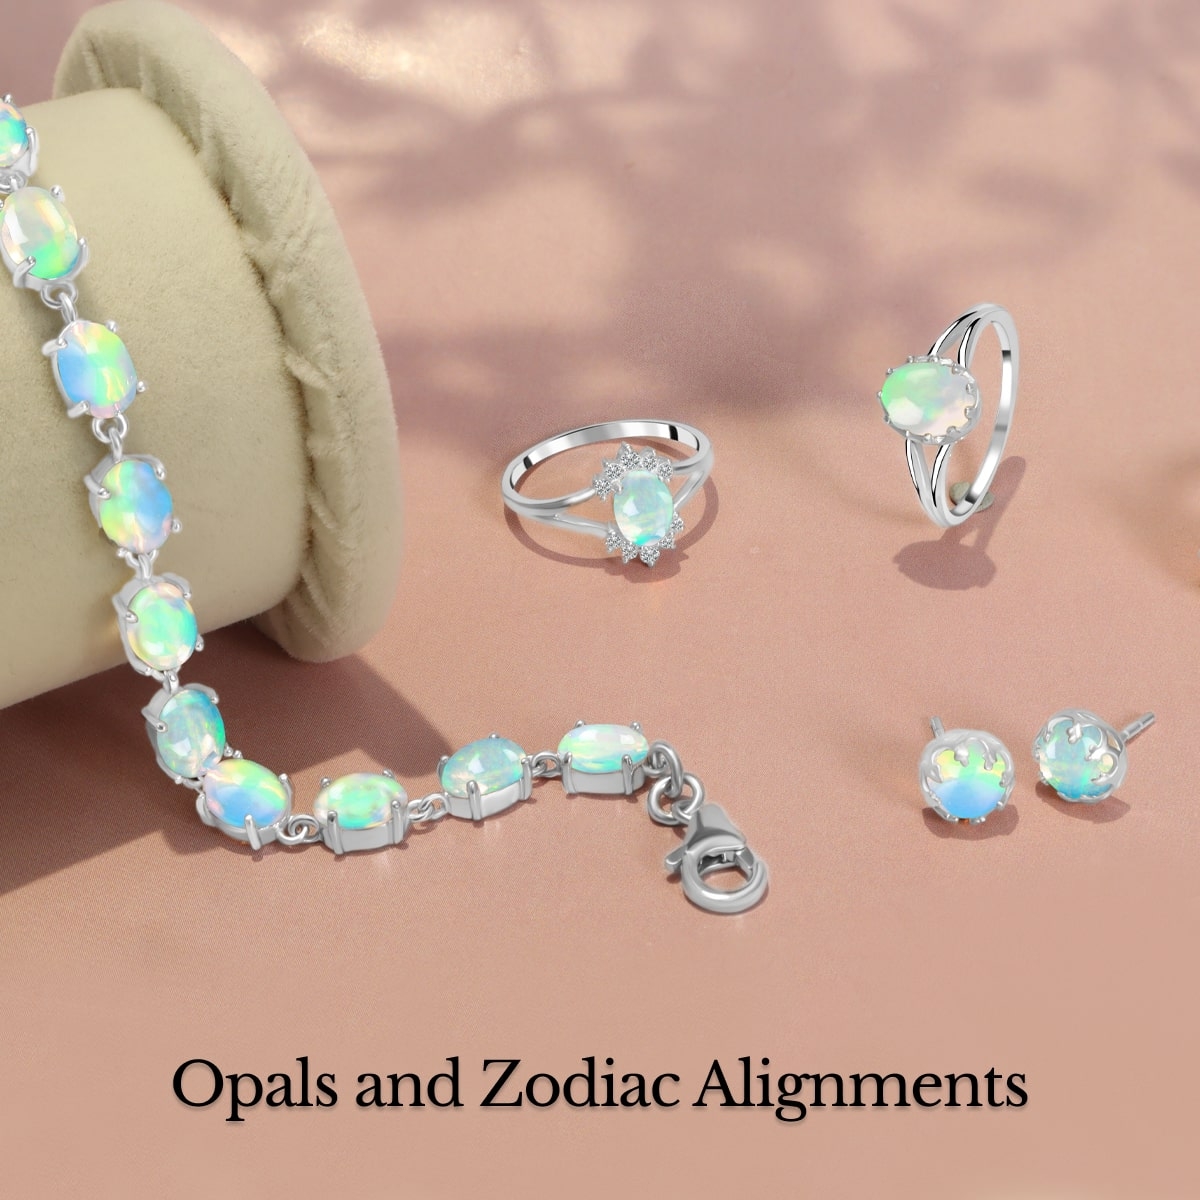 Zodiac sign associated with Opals